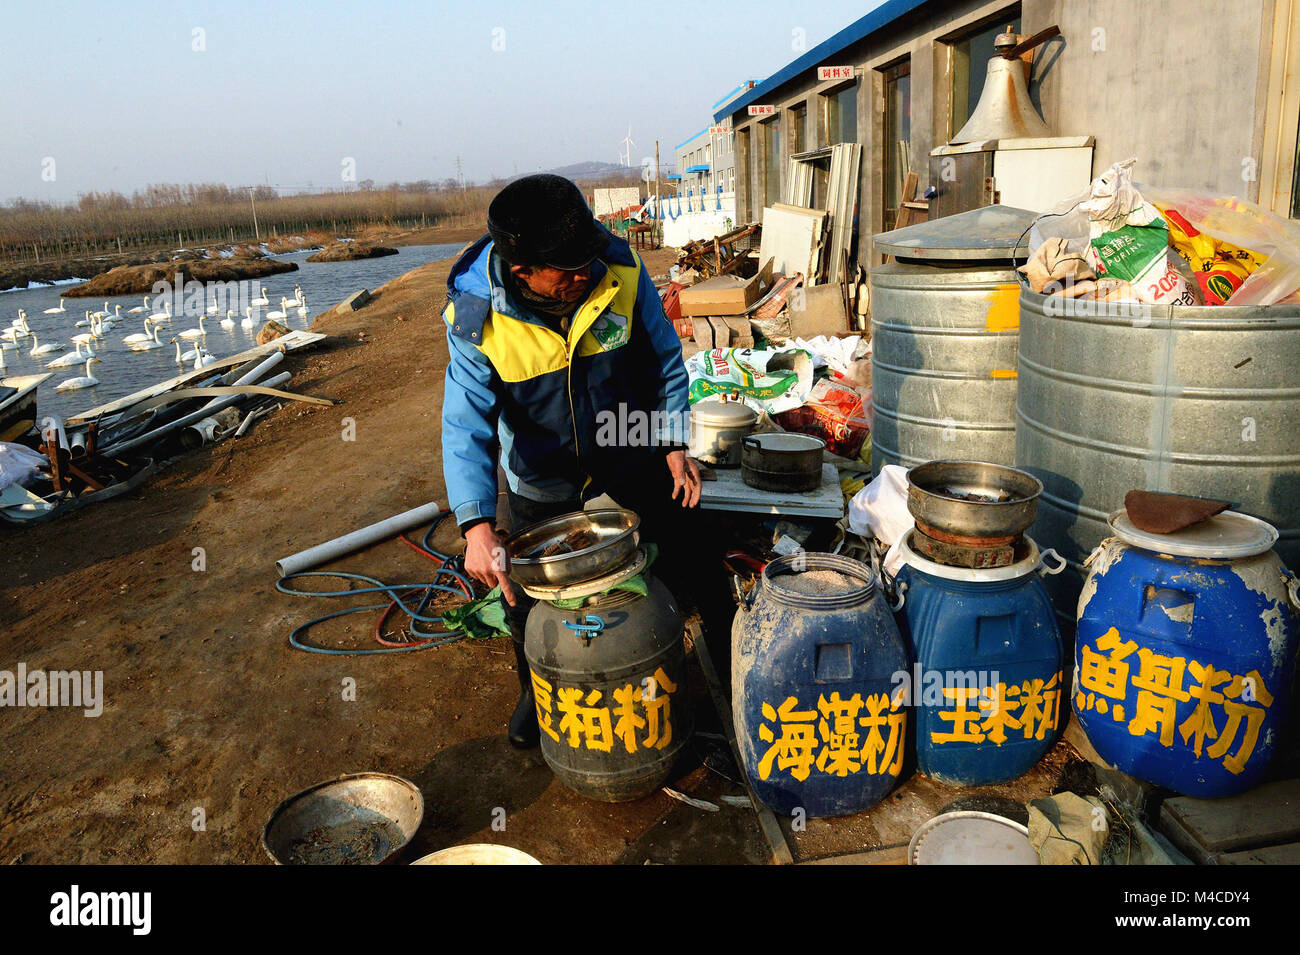 (180216) -- JINAN, Feb. 16, 2018 (Xinhua) -- Yuan Xueshun prepares food for swans in Chengshan Town of Rongcheng City, east China's Shandong Province, Feb. 14, 2018. Yuan Xueshun, dubbed as 'swan guard,' has devoted himeself to the protection of swans for over 40 years. He has rescued more than 1,000 sick or wounded swans and succeeded in preventing more than 1,000 mu (66.67 hectares) of wetland from being destroyed since 1975. Thanks to the efforts made by people like Yuan, the Swan Lake in Rongcheng has become an ideal habitat for swans in winter. (Xinhua/Feng Jie) (mp) Stock Photo